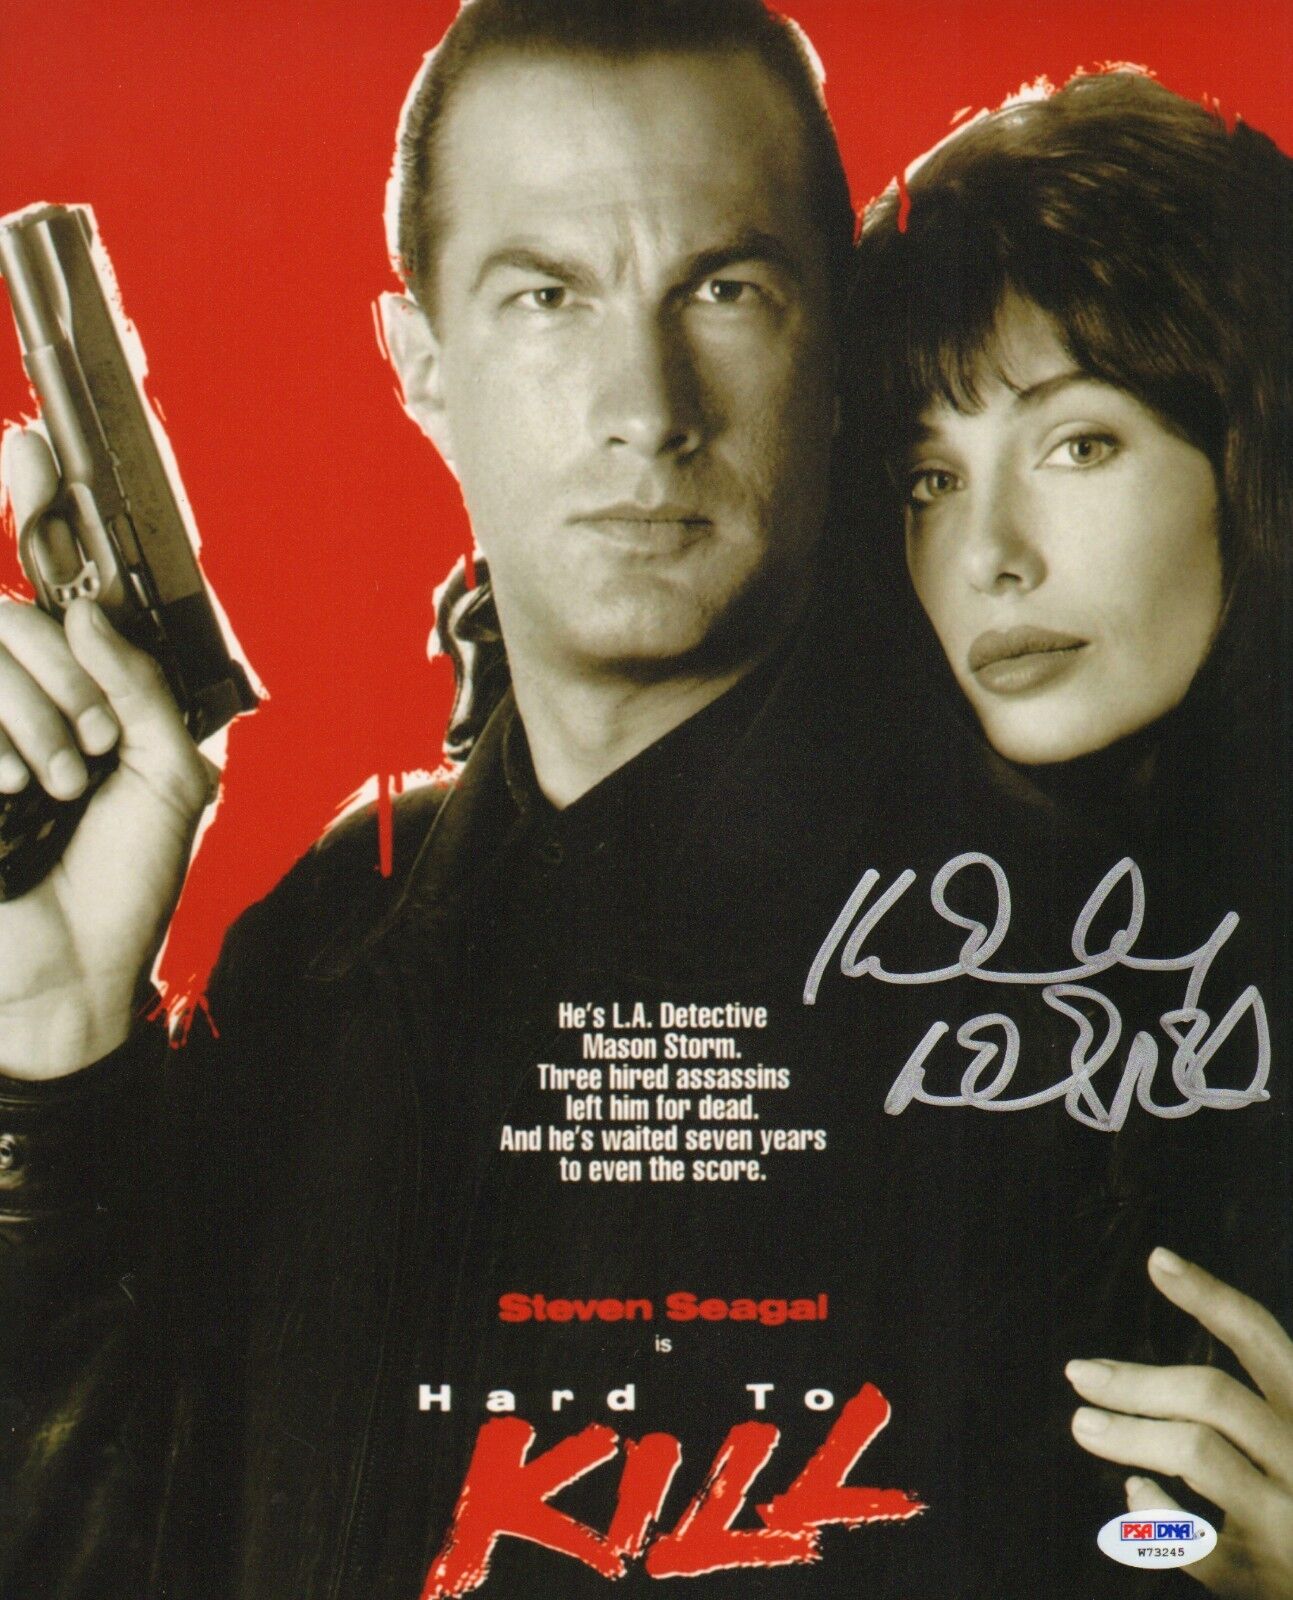 Kelly LeBrock Signed Hard To Kill 11x14 Photo Poster painting PSA/DNA COA Picture Autograph 1990